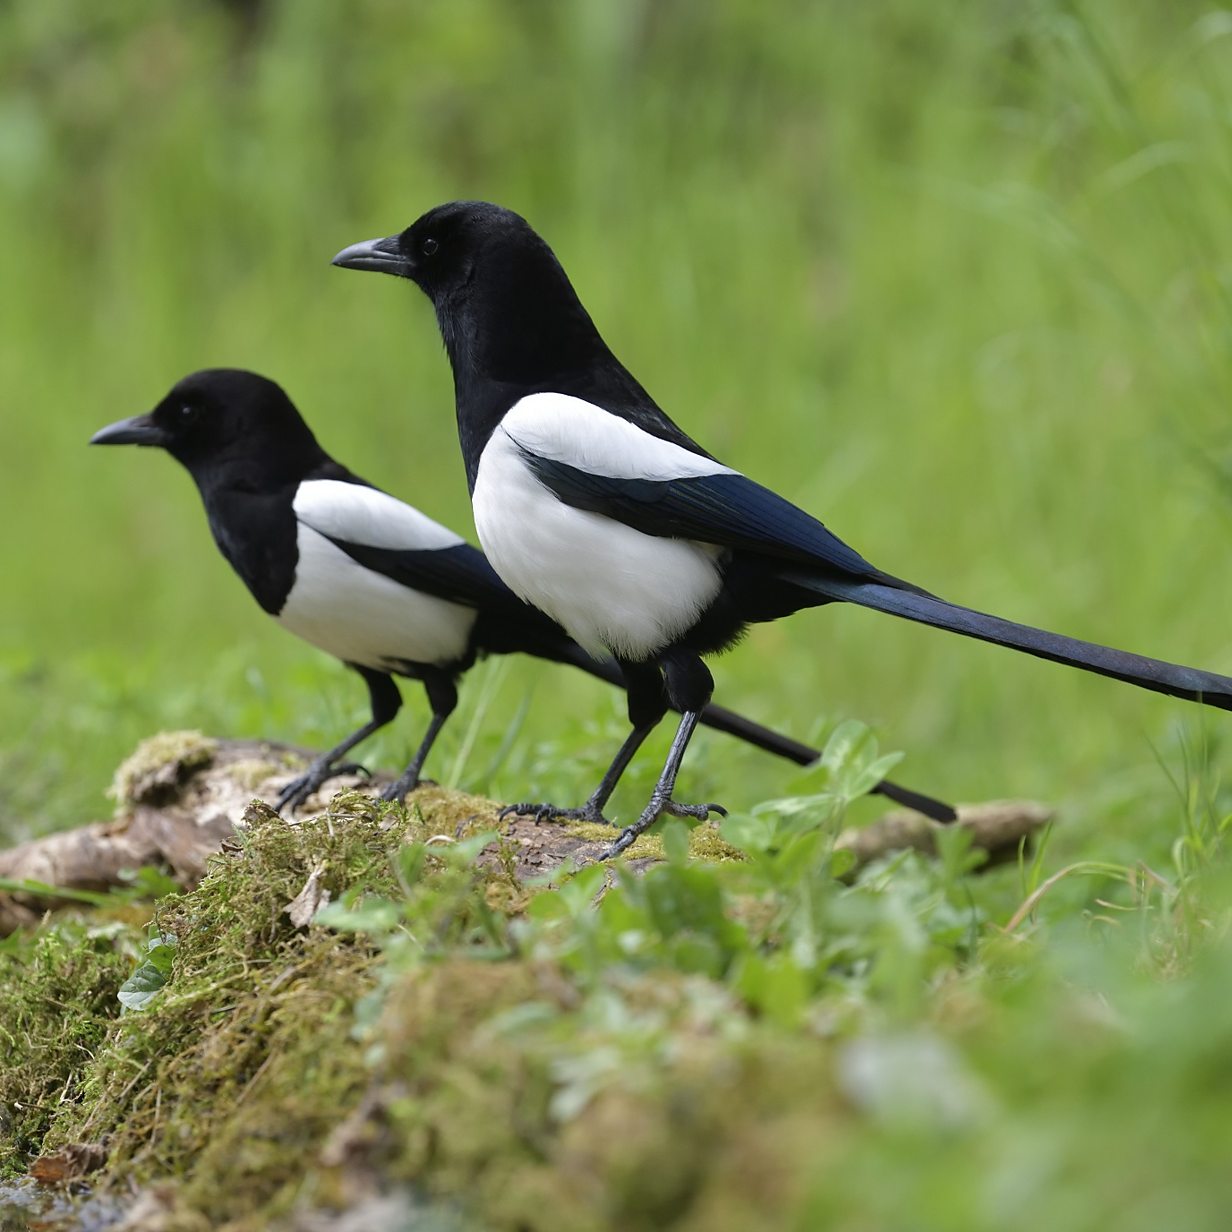 If I don't see two magpies, I get panic attacks' - BBC News